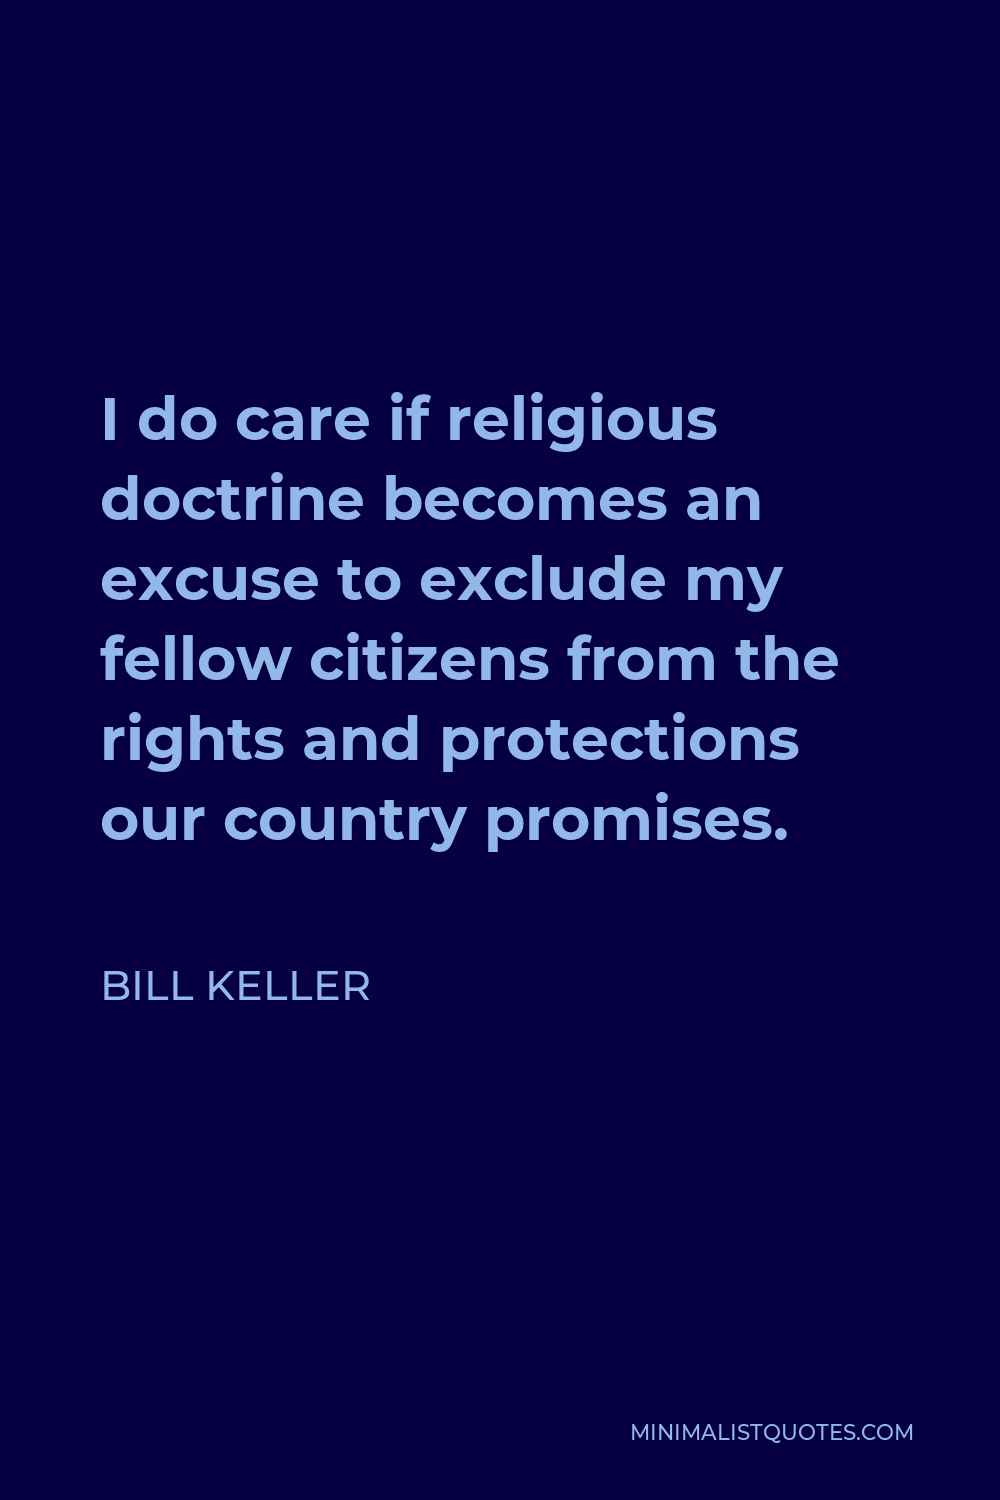 Bill Keller Quote - I do care if religious doctrine becomes an excuse to exclude my fellow citizens from the rights and protections our country promises.